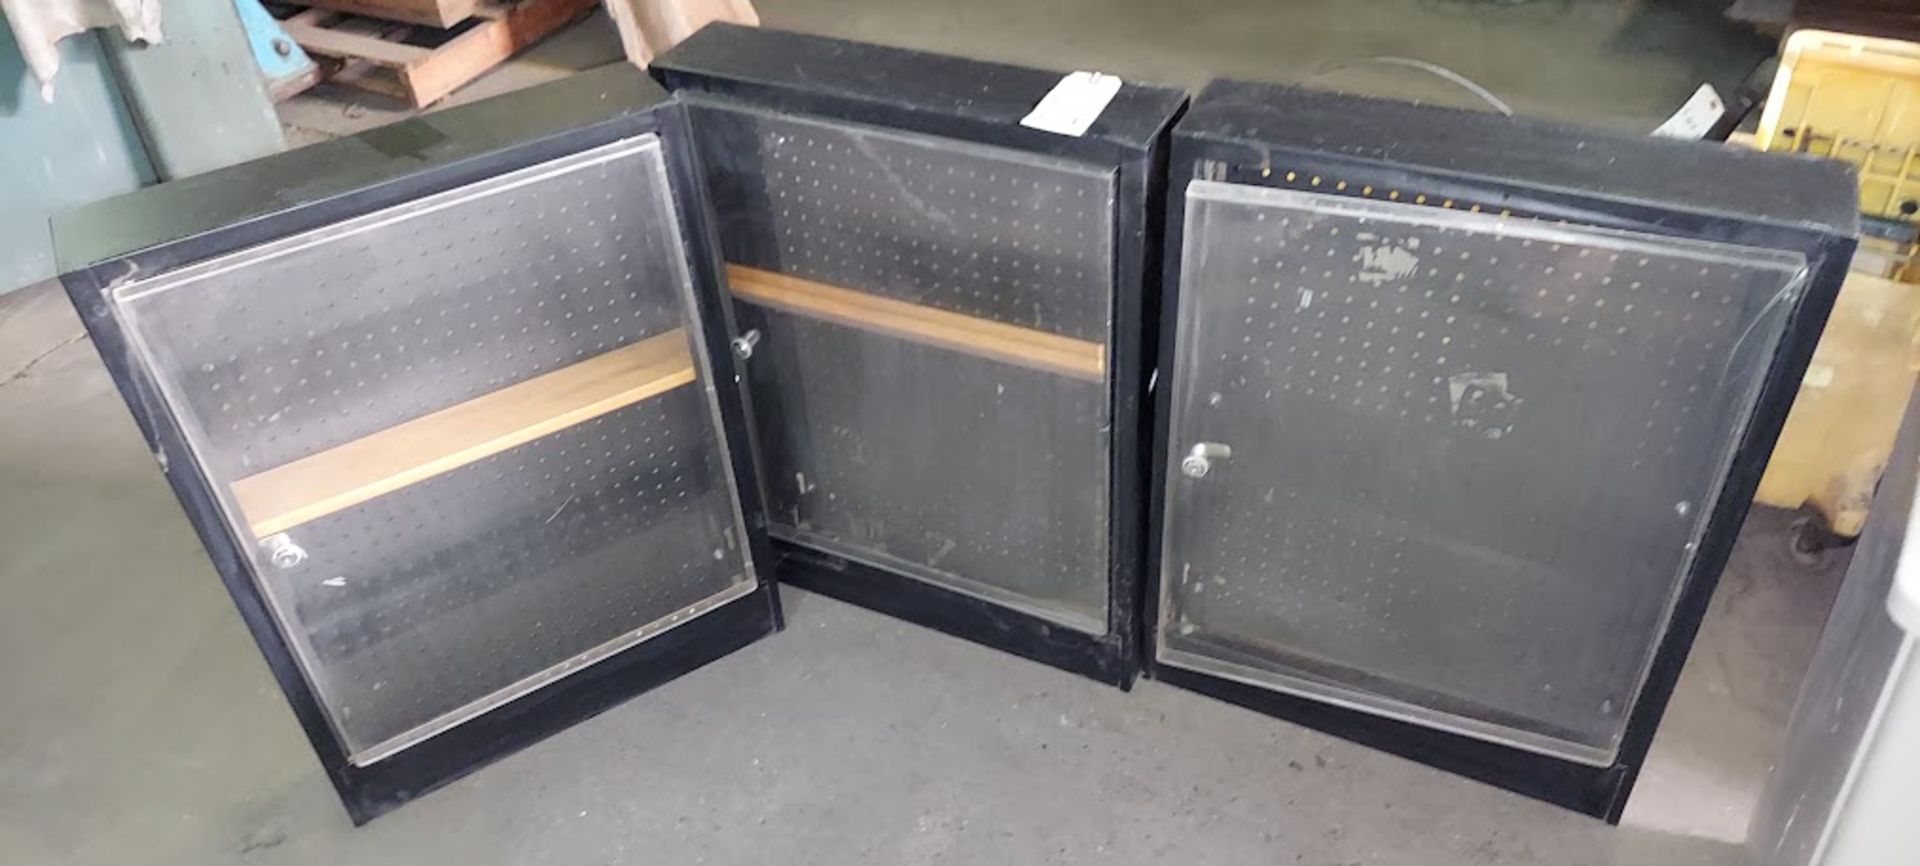 3 - Lockable Display Cases, Size 22" x 30"